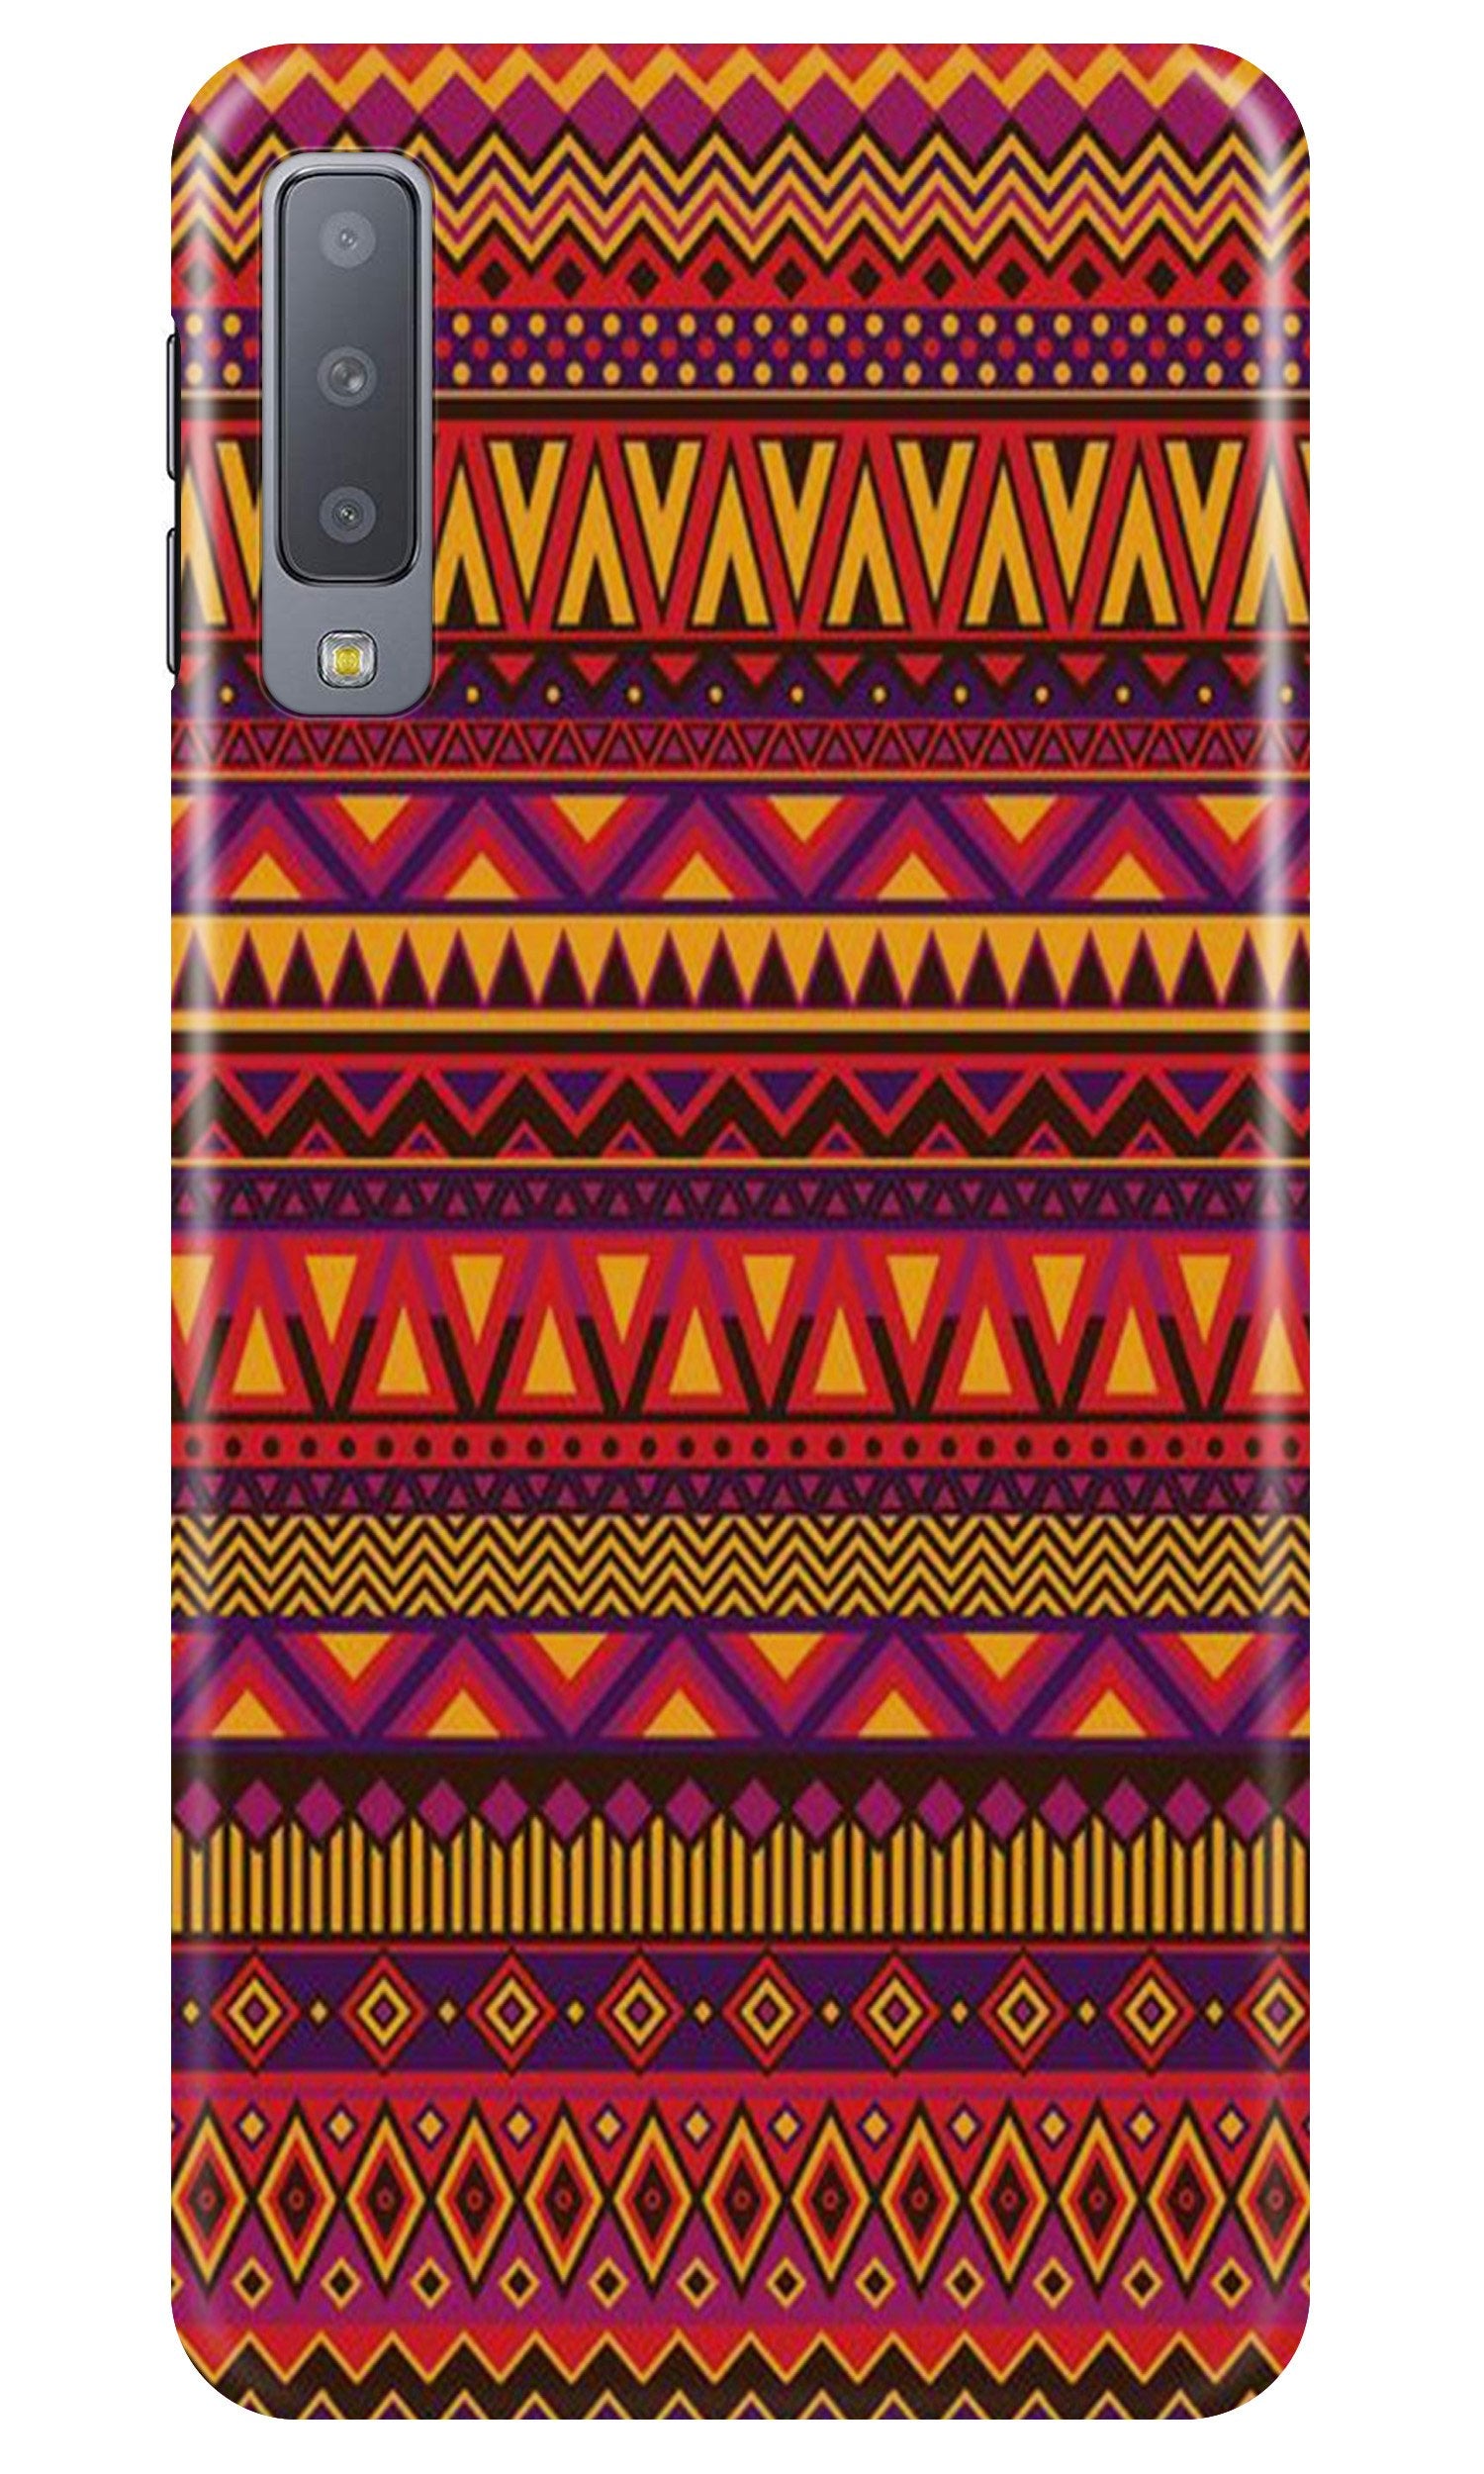 Zigzag line pattern2 Case for Samsung Galaxy A70